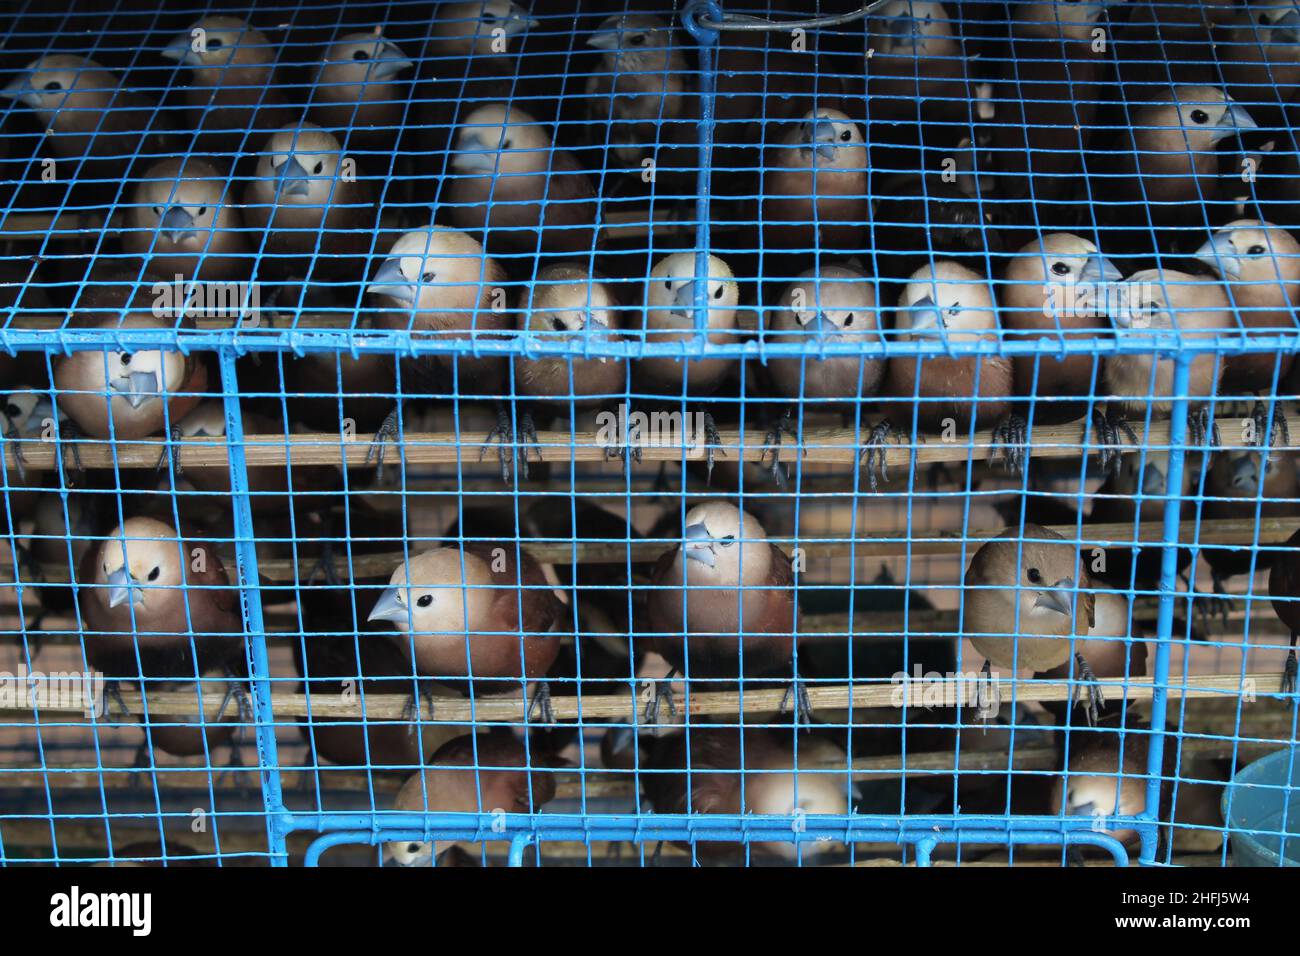 bird in a cage at the animal market. Stock Photo